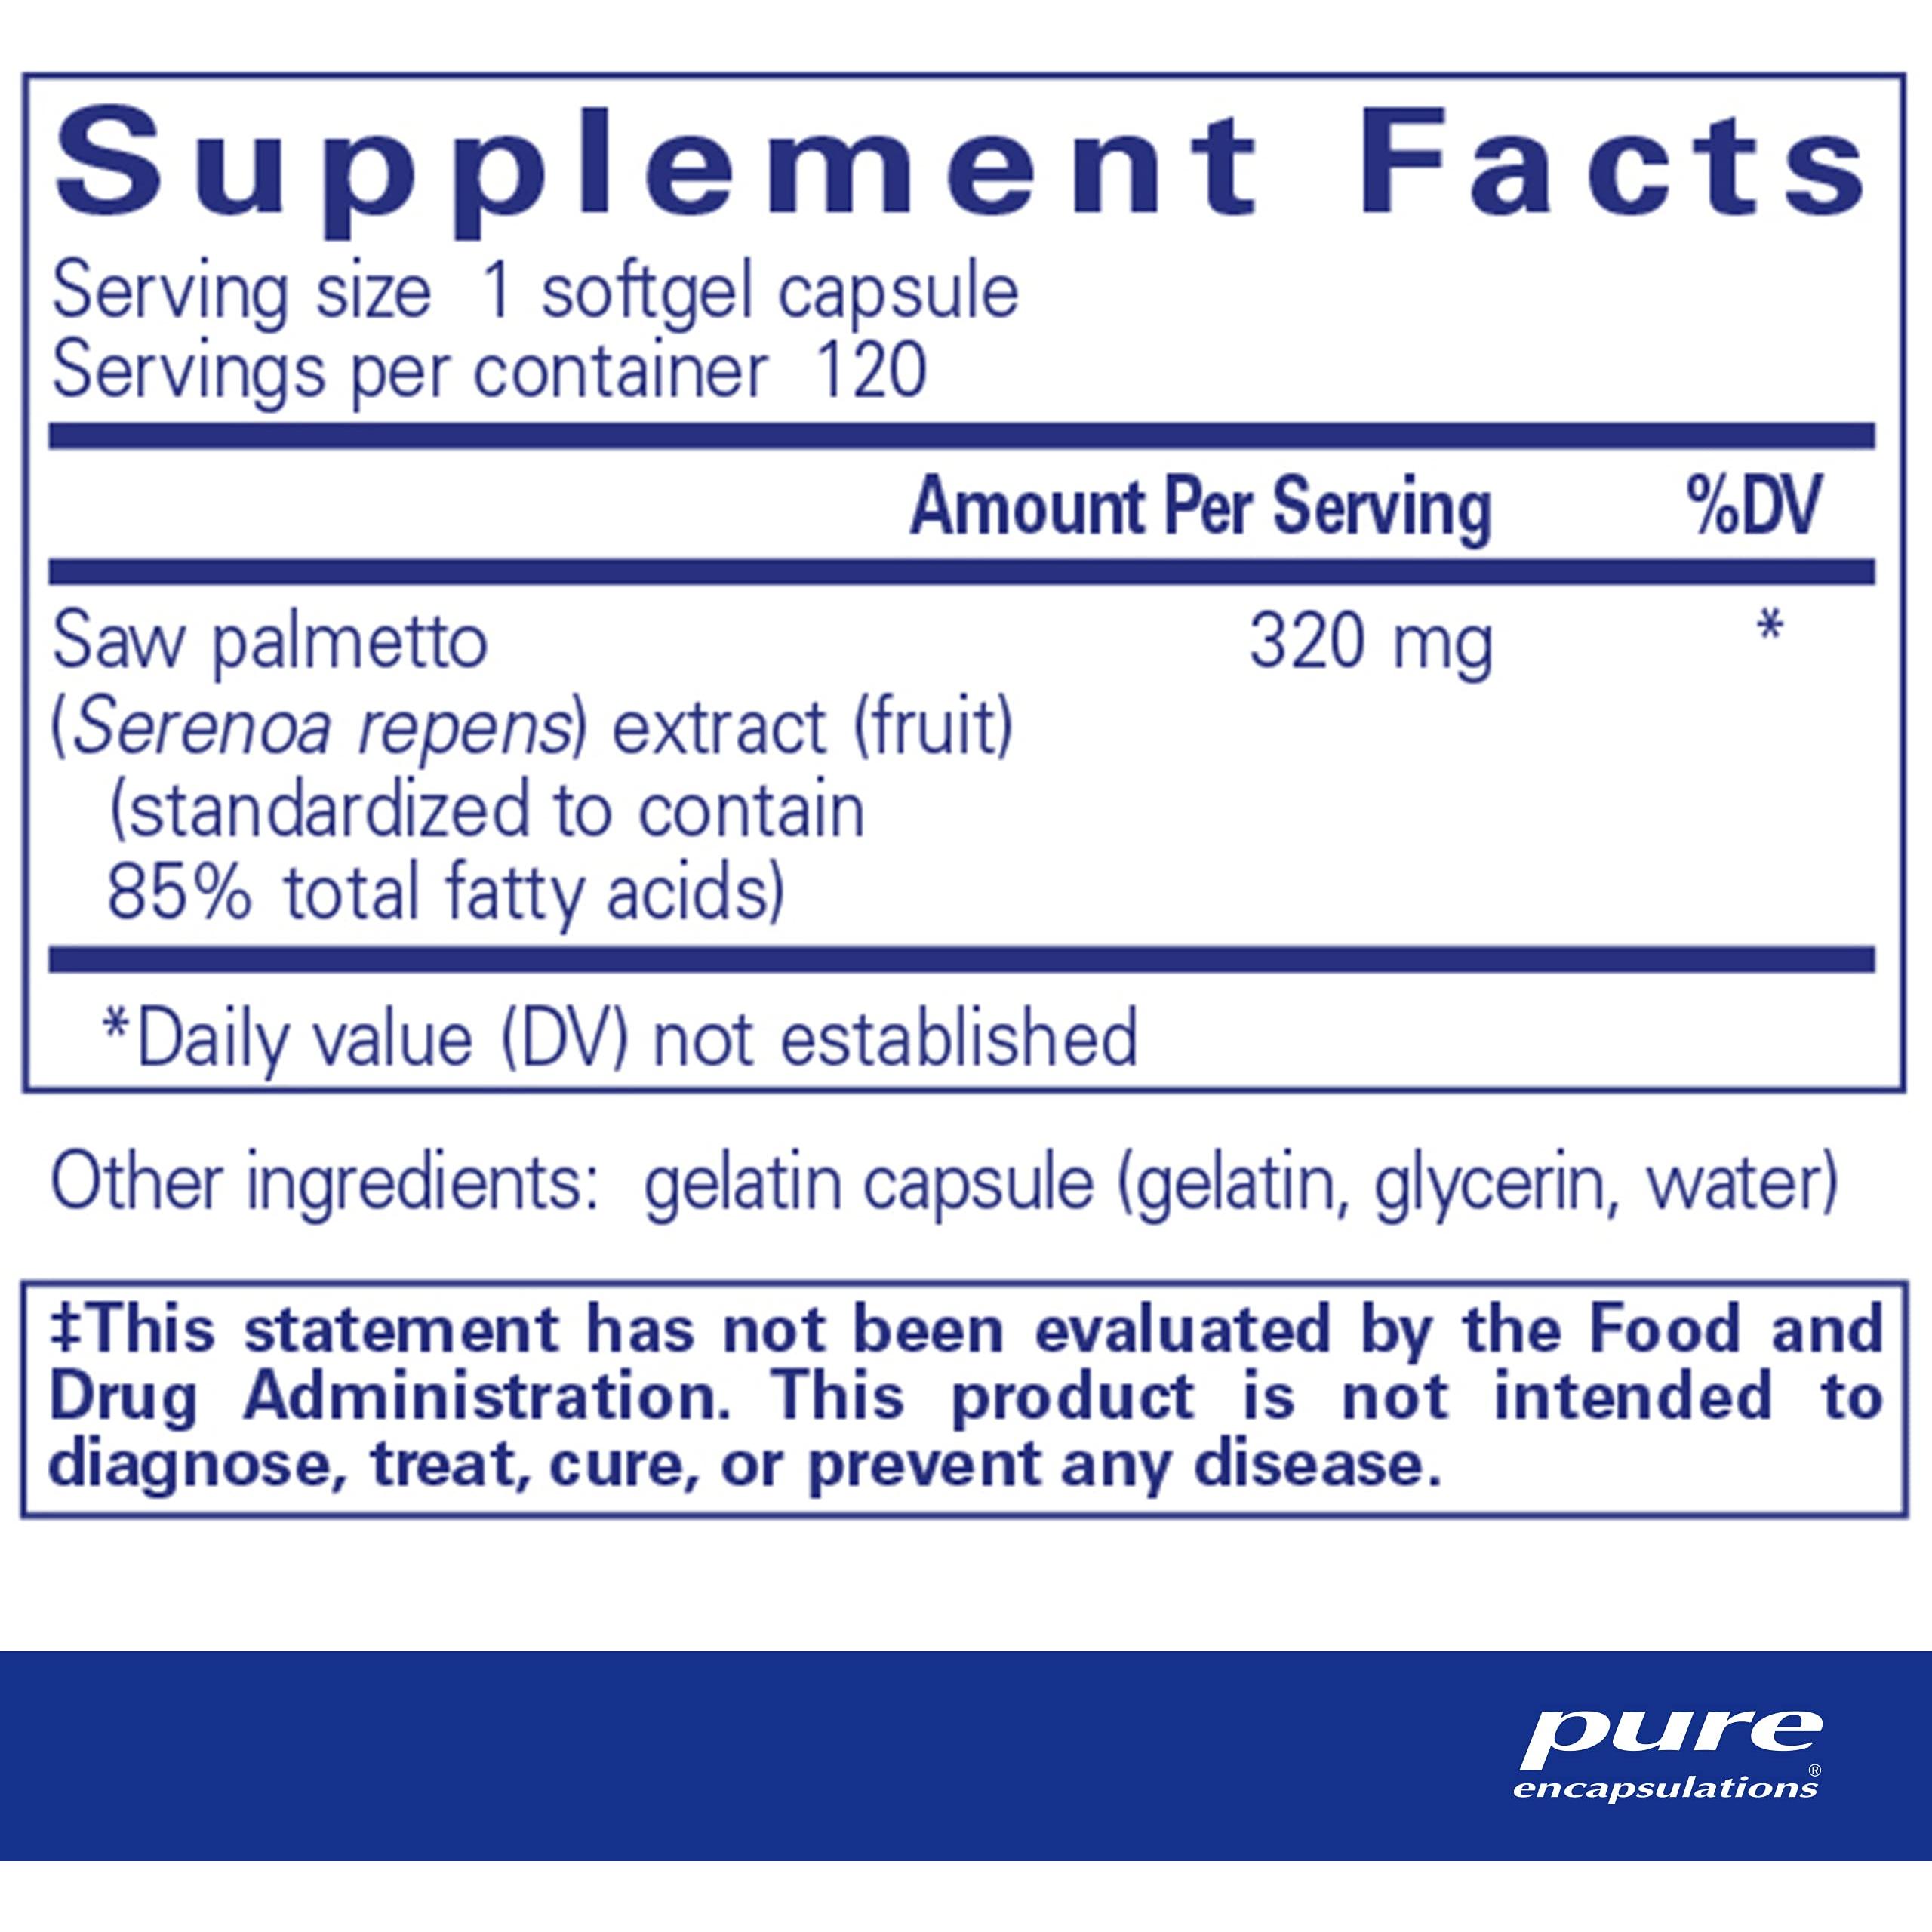 Pure Encapsulations Saw Palmetto 320 - Fatty Acids &amp; Other Essential Nutrients to Support Metabolism &amp; Urinary Function - with Saw Palmetto Extract - 120 Softgel Capsules